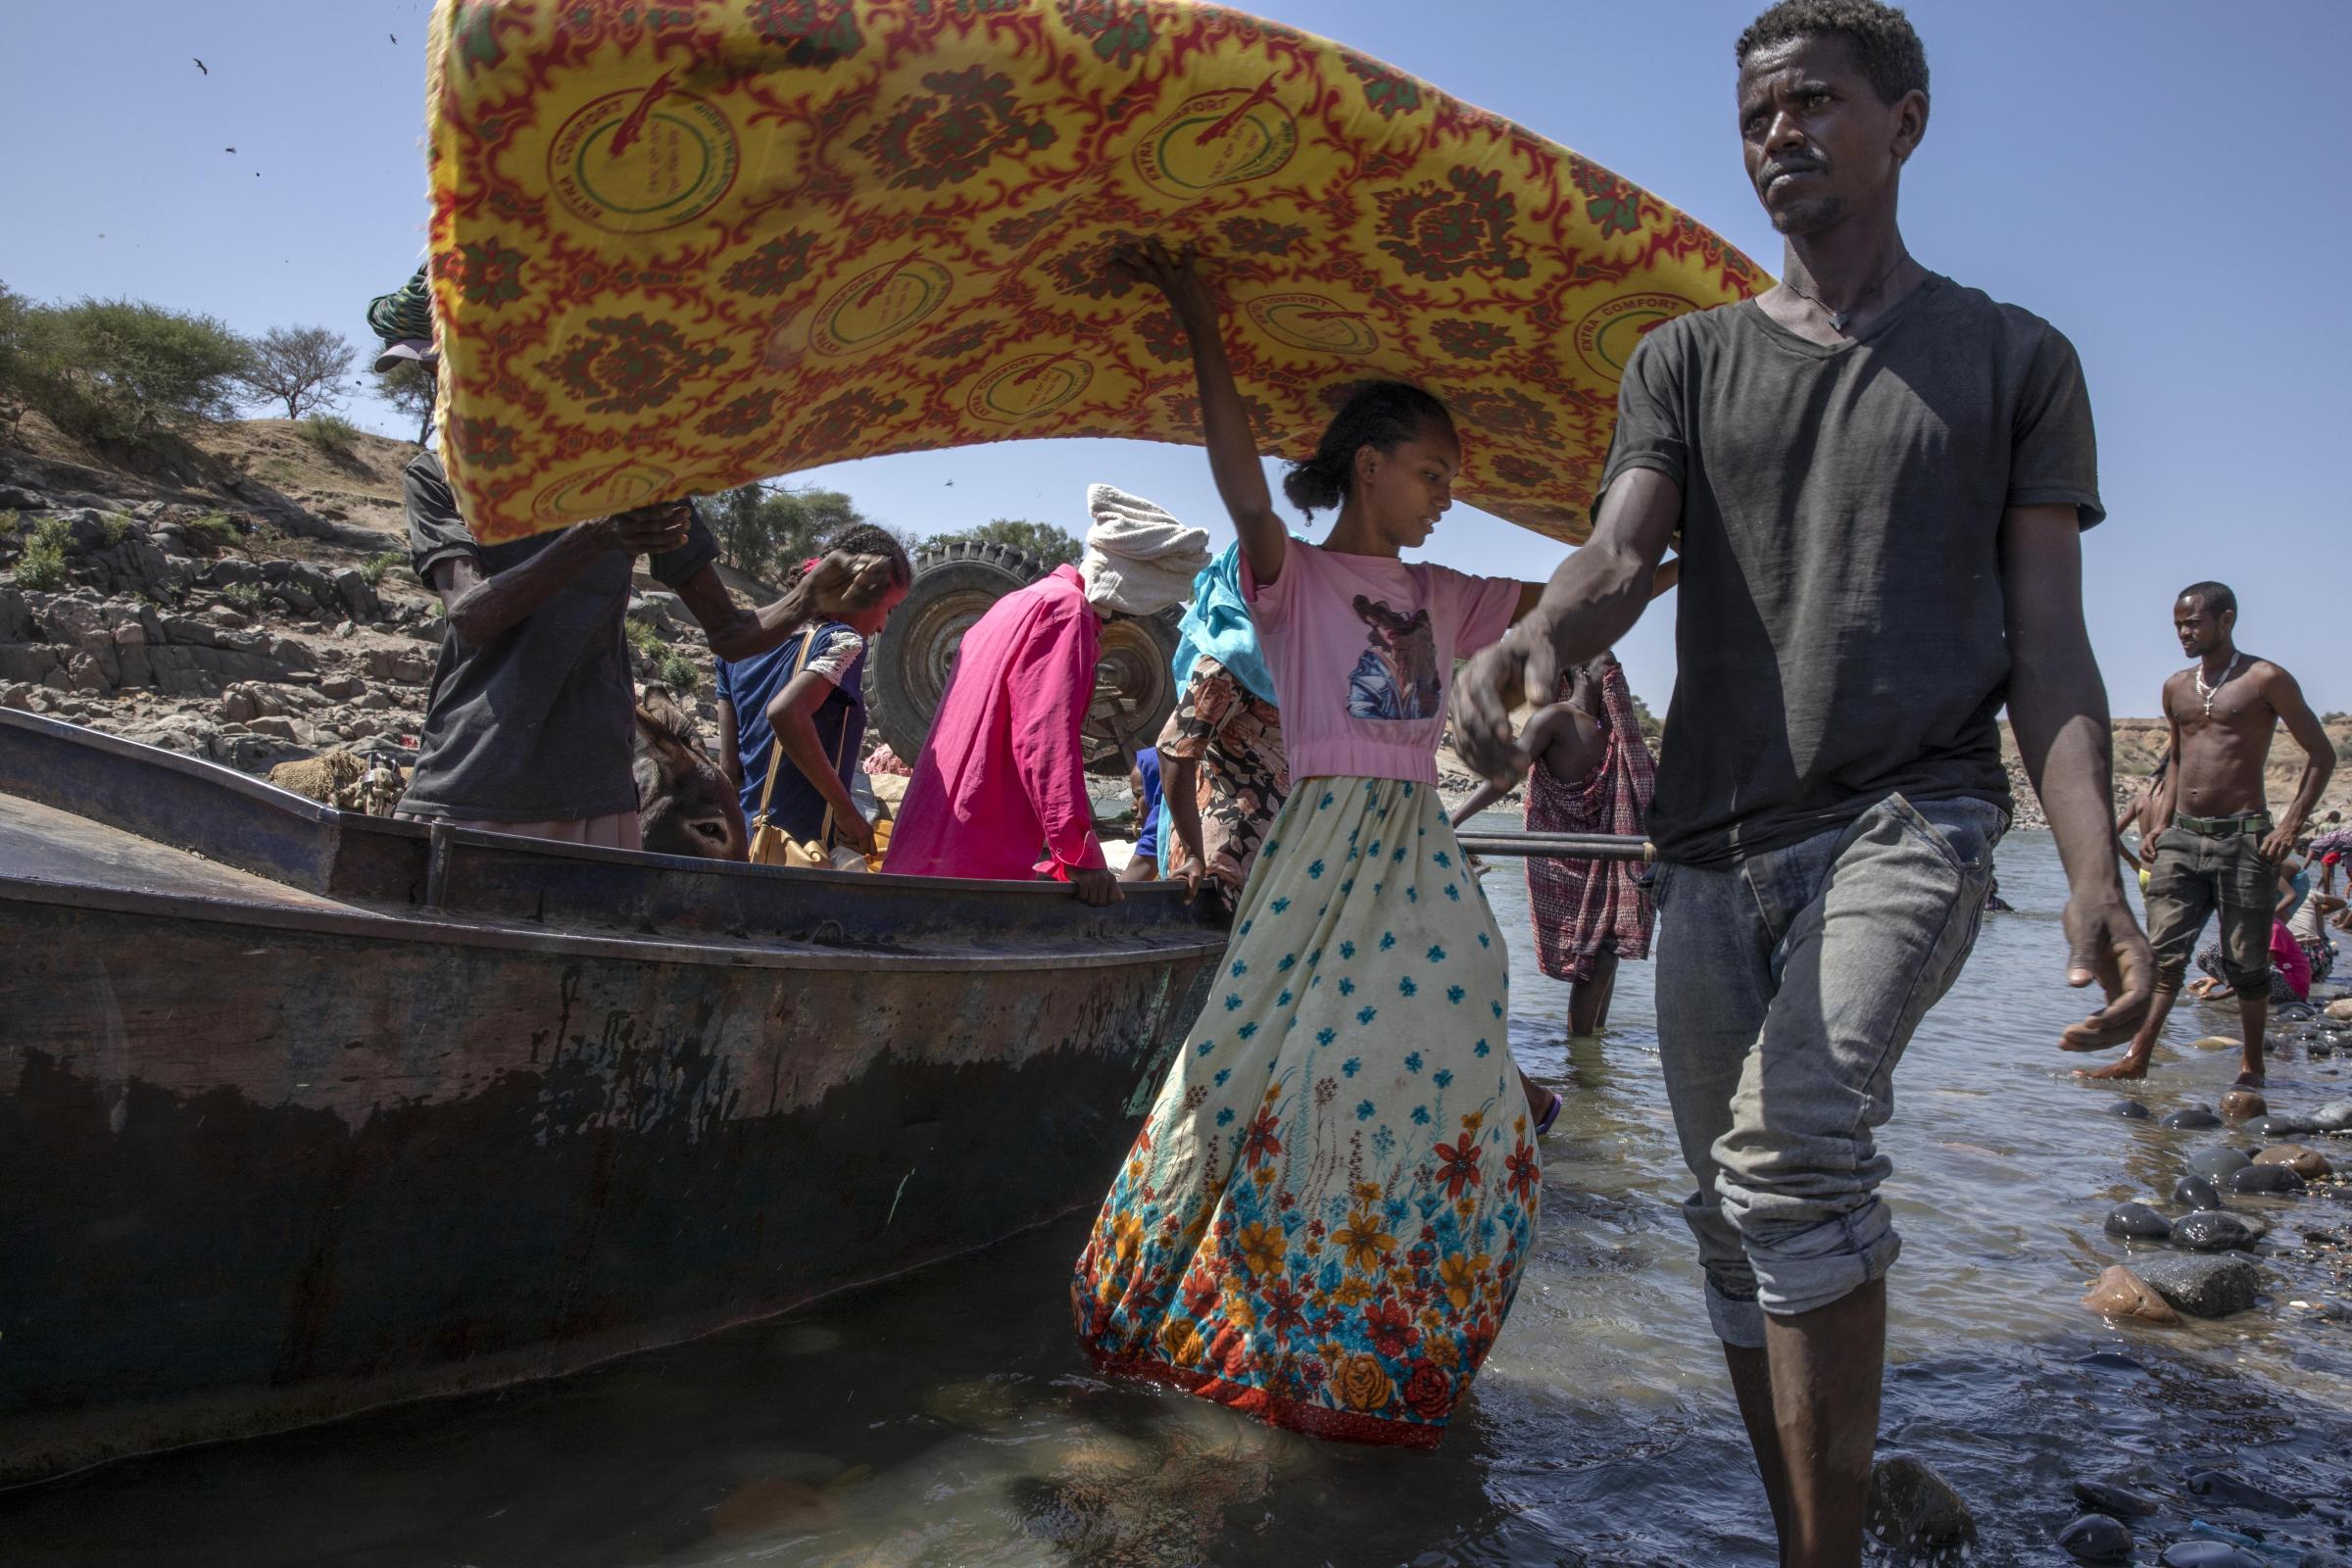 Tigray refugees who fled the conflict in the Ethiopia's Tigray region carry their belongings off a boat after arriving on the banks of the Tekeze River on the Sudan-Ethiopia border, in Hamdayet, eastern Sudan on Nov. 2020.